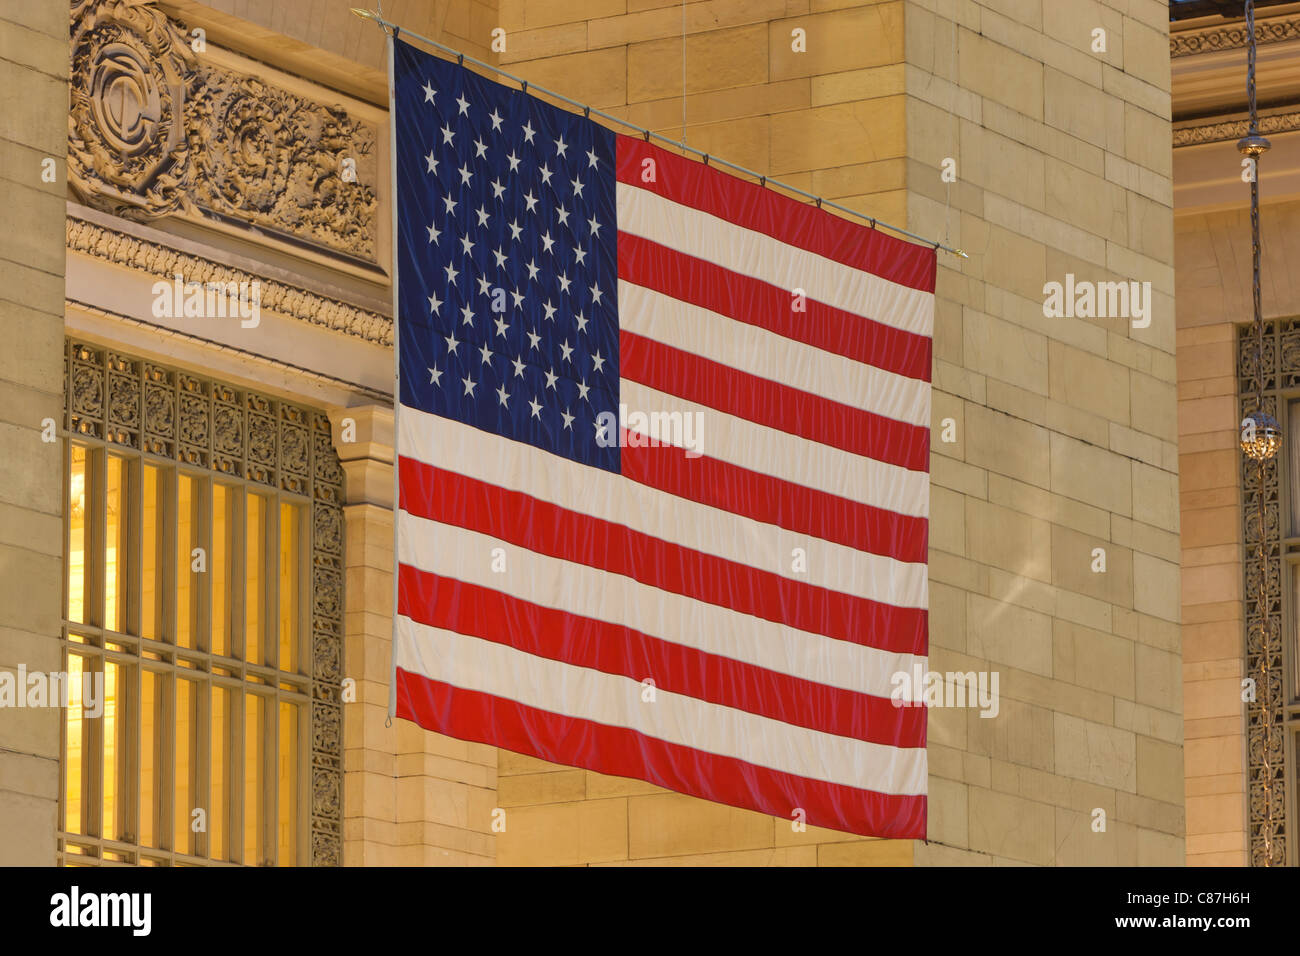 The large American flag hanging in Grand Central Terminal in New York City Stock Photo